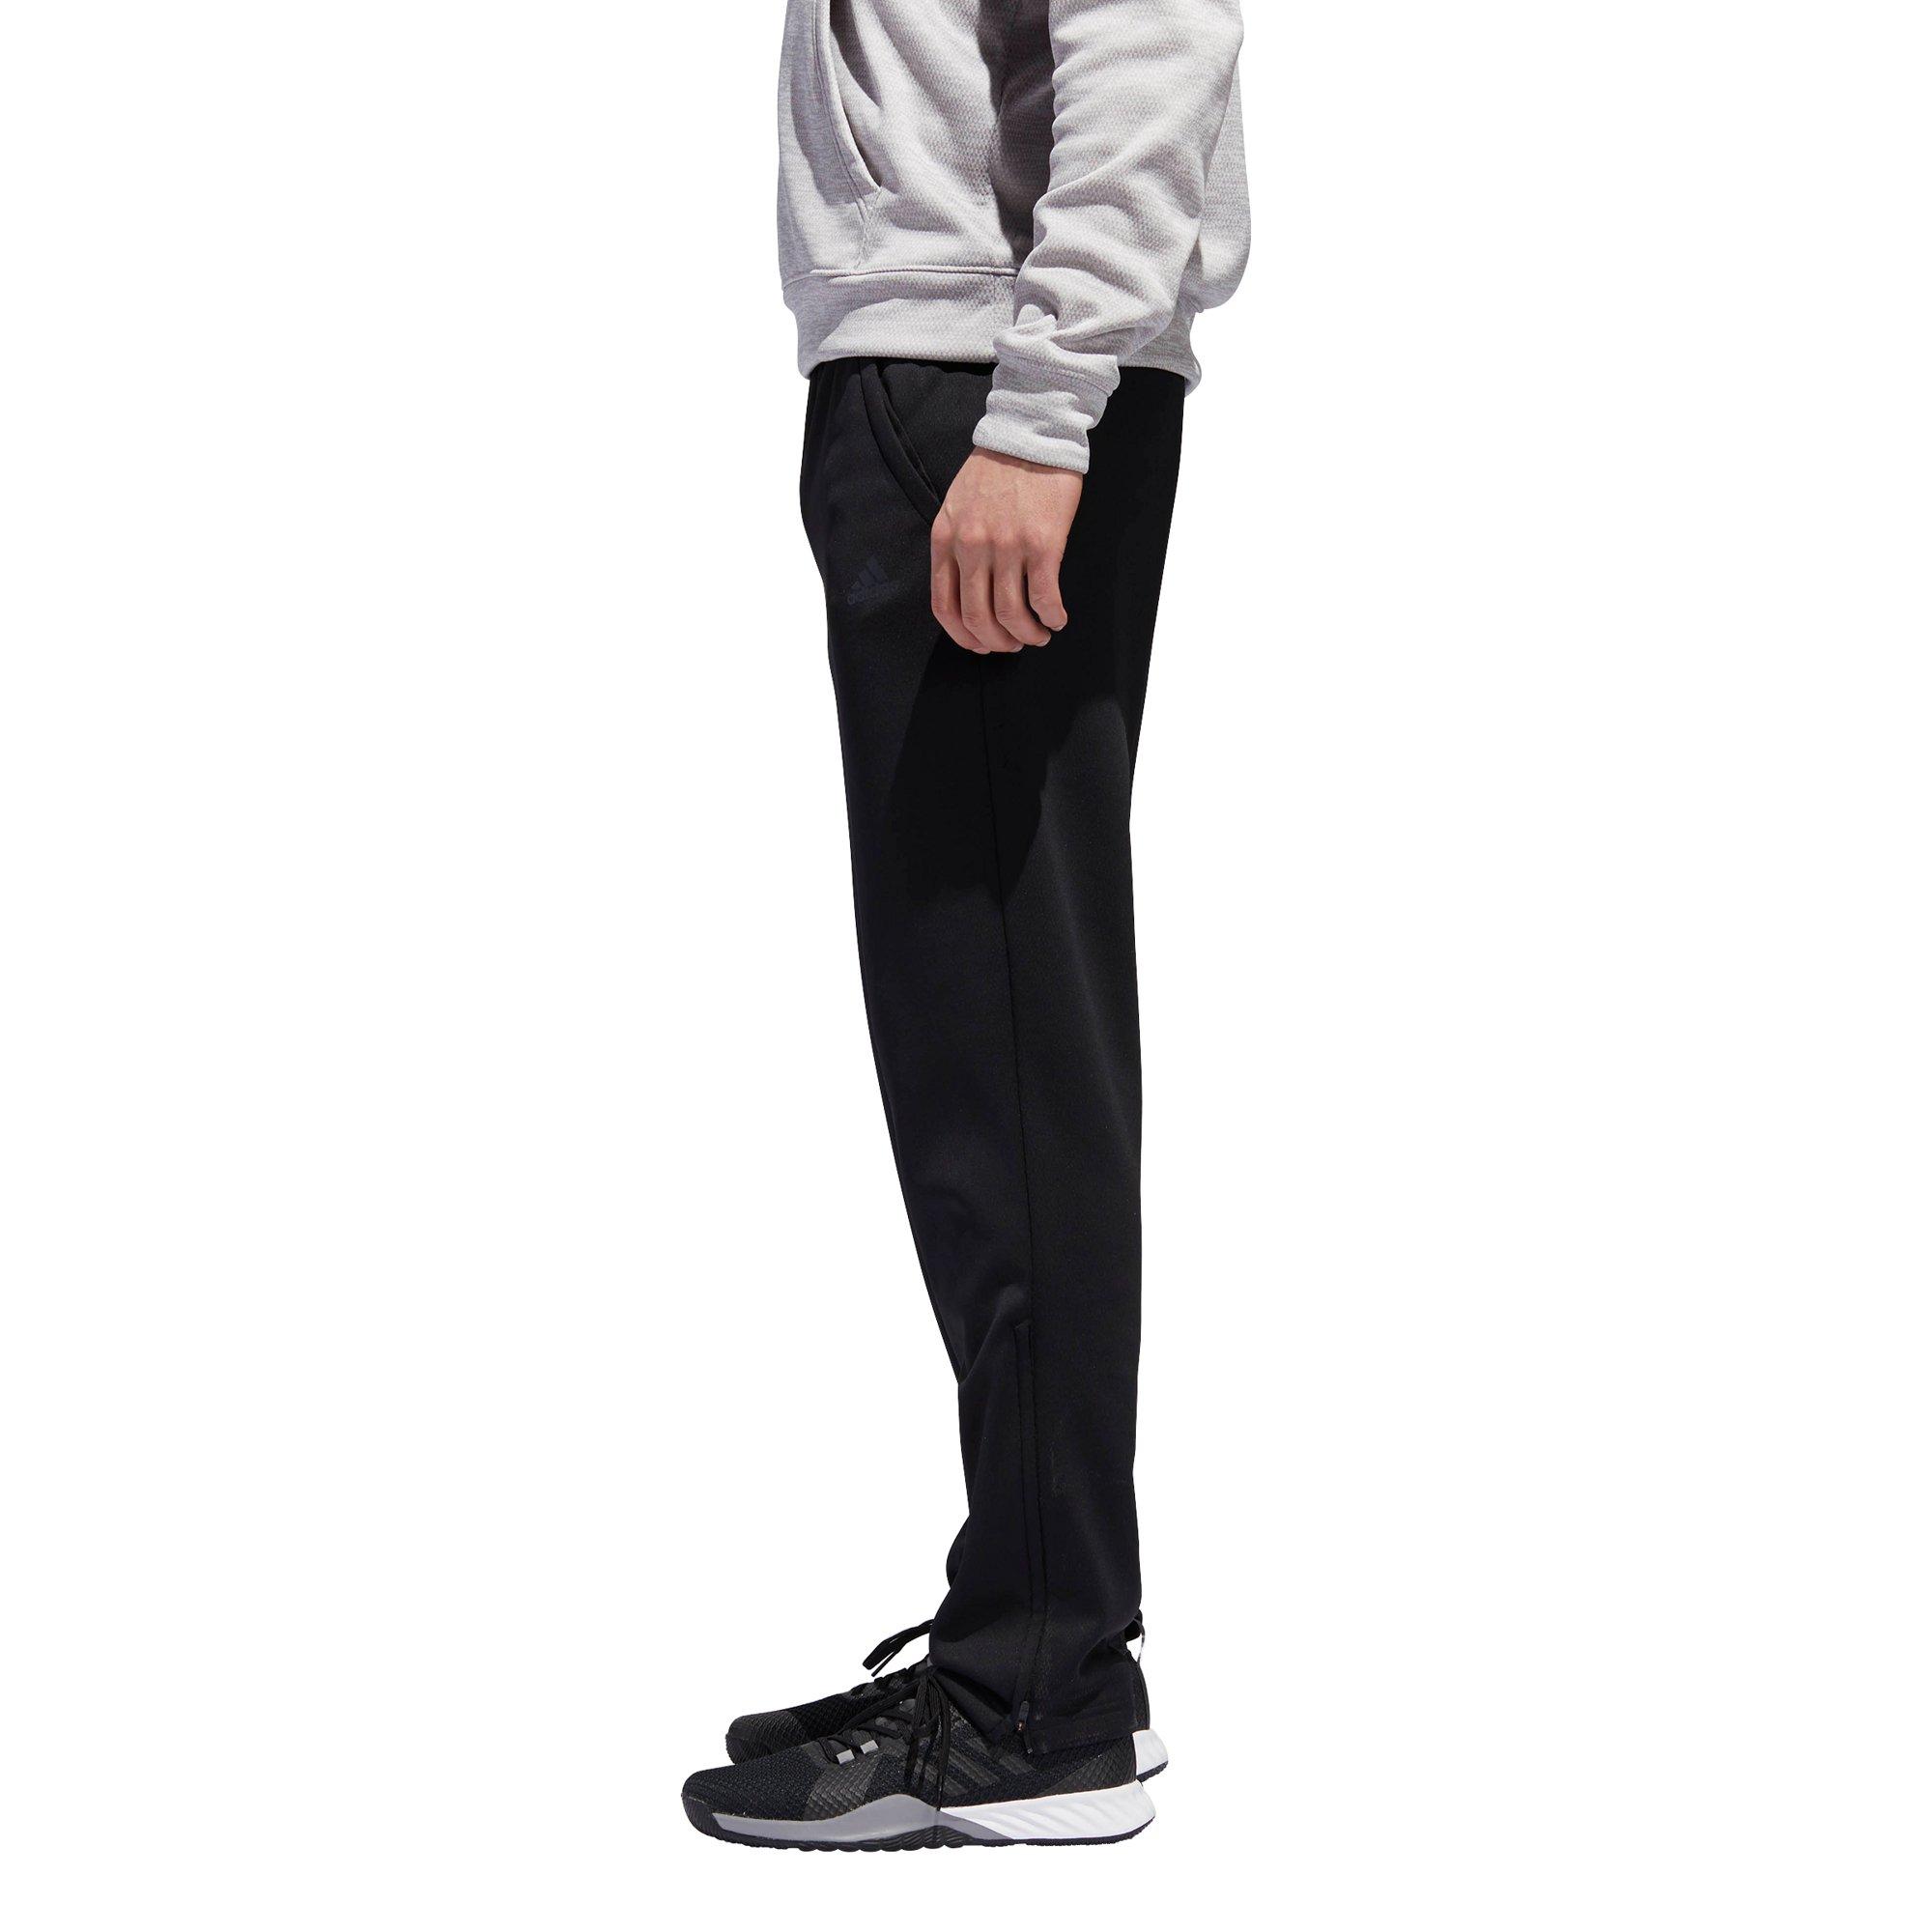 adidas men's team issue tapered pants